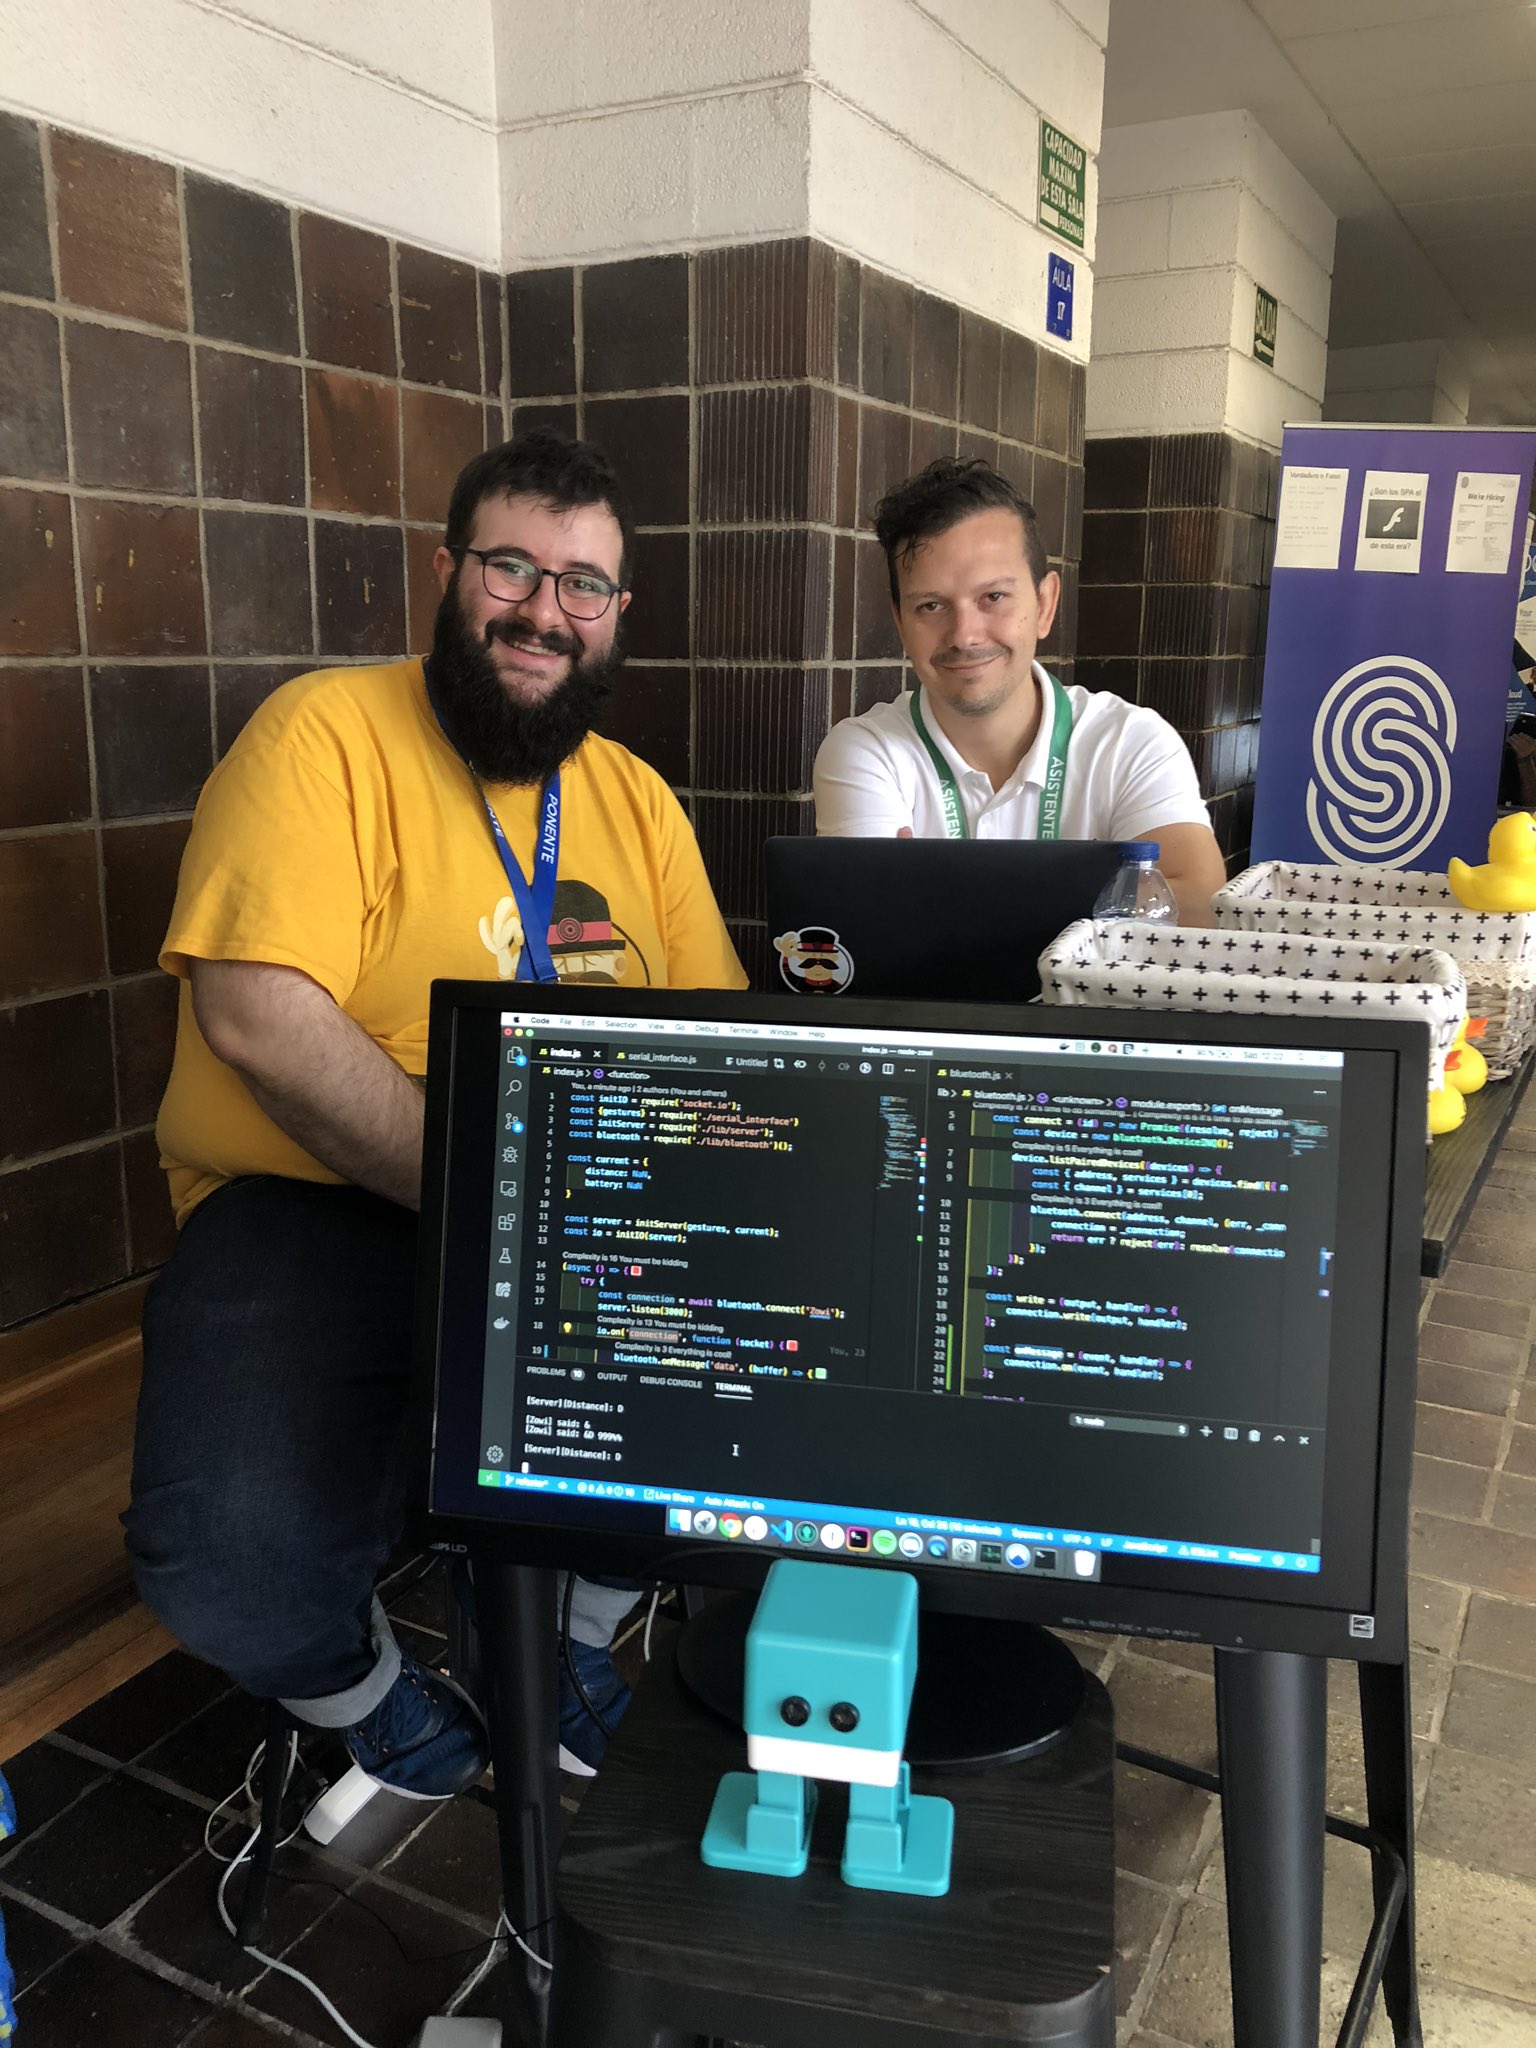 Node-zowi development during the JsDayCanarias 2019. Ulises Gascon and Felipe Polo